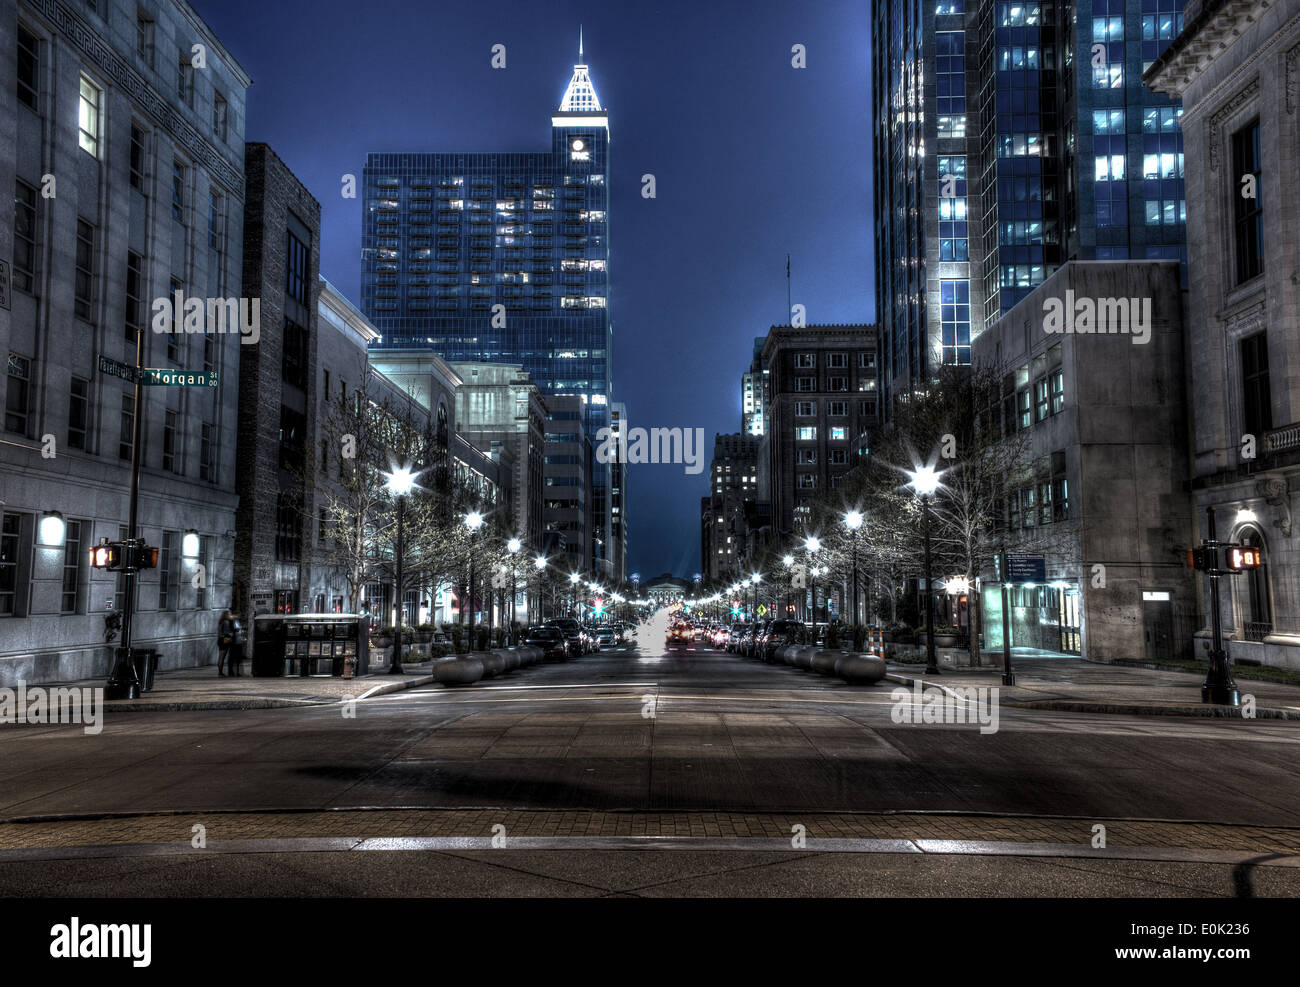 Downtown City at night with lights from cars passing by Stock Photo